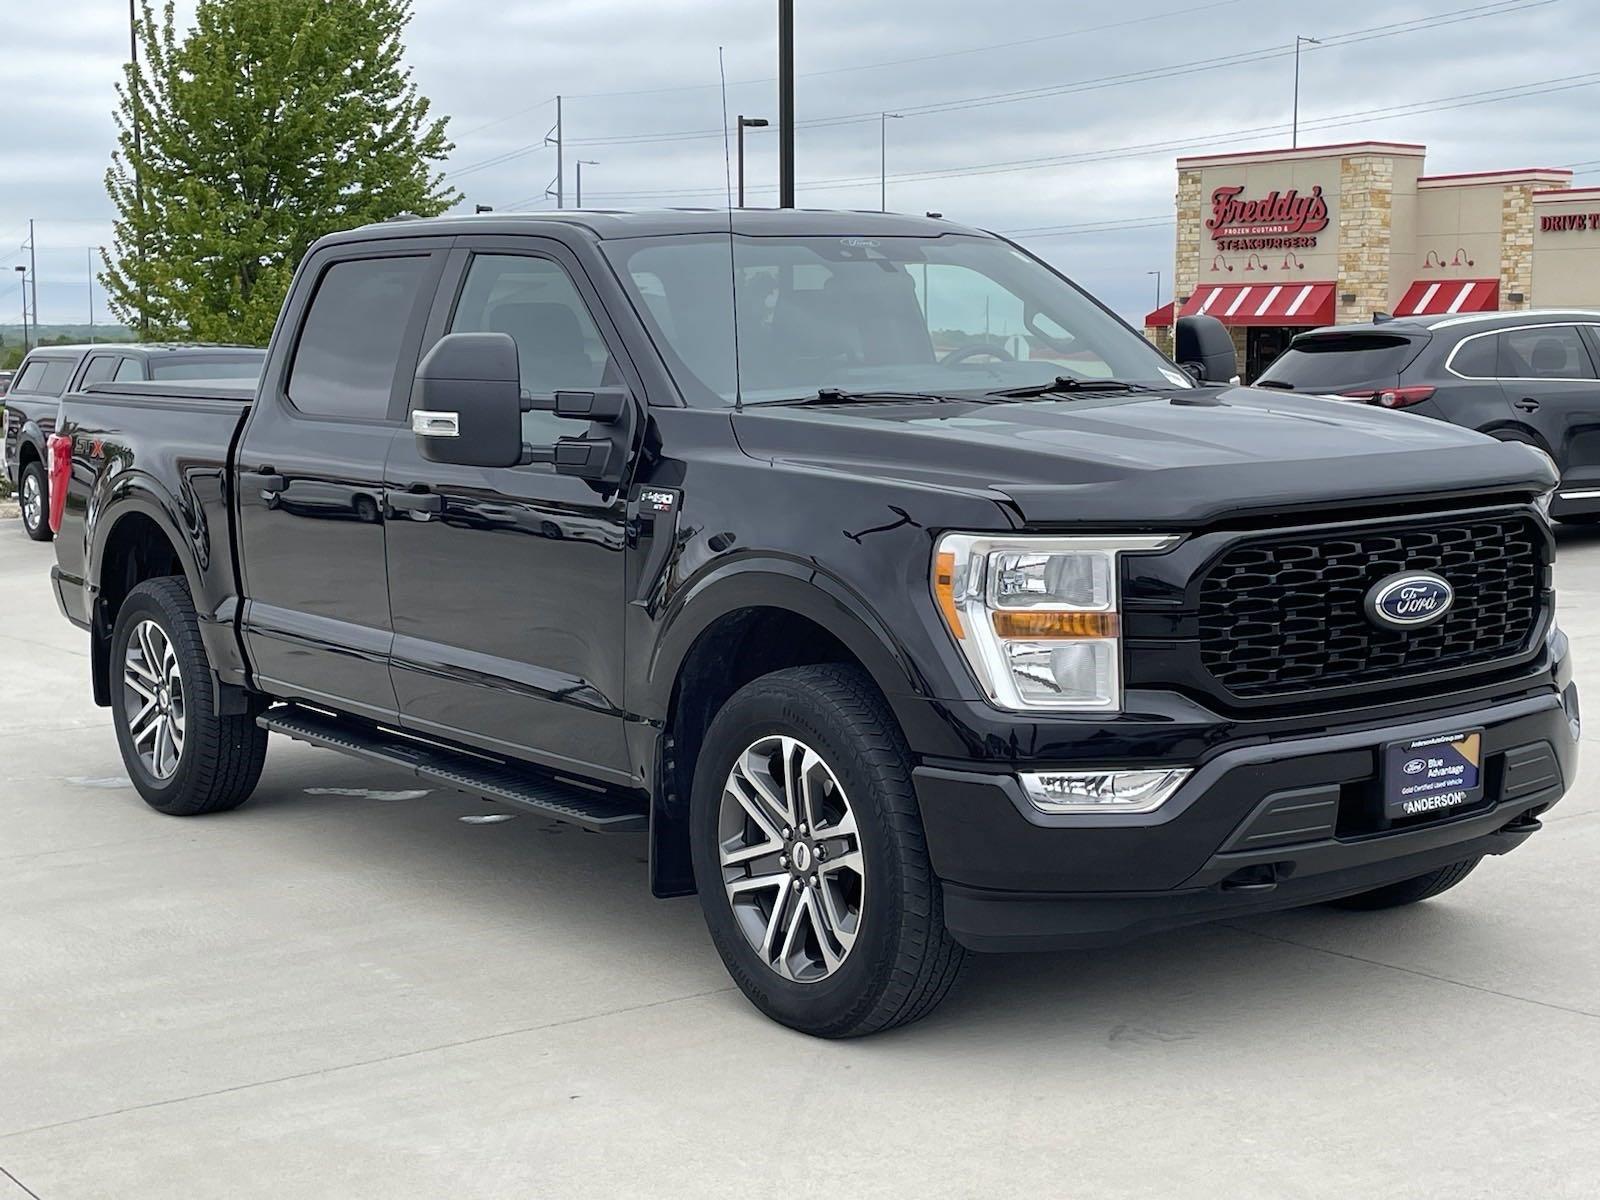 Used 2021 Ford F-150 XL SuperCrew Cab Styleside for sale in Lincoln NE